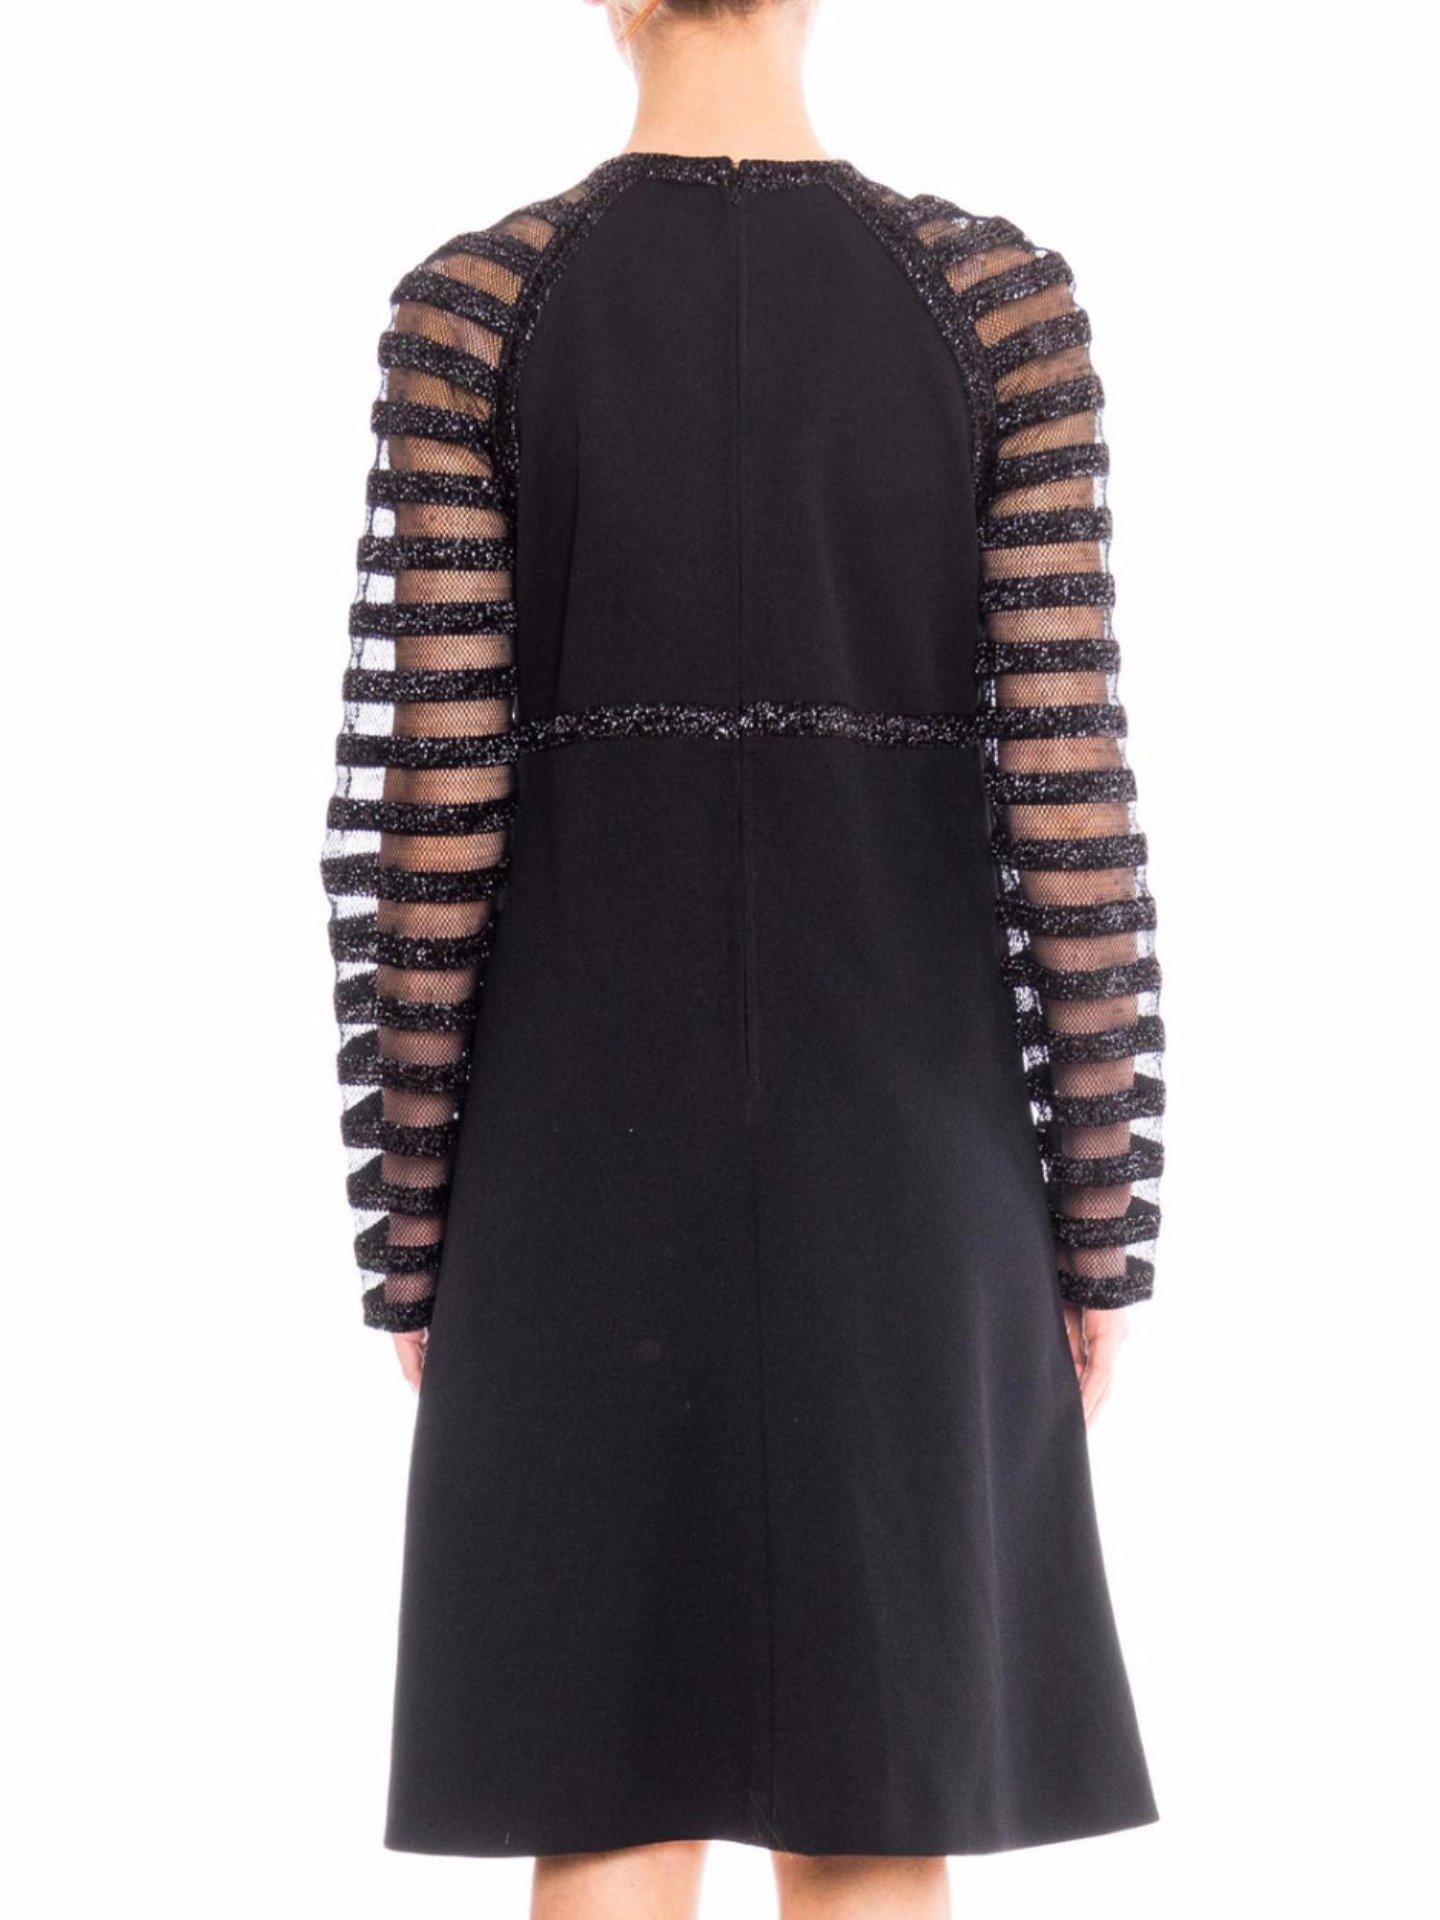 1960S JACQUELINE VANOYE Black Polyester Knit MOD Cocktail Dress With Mesh Lurex For Sale 1